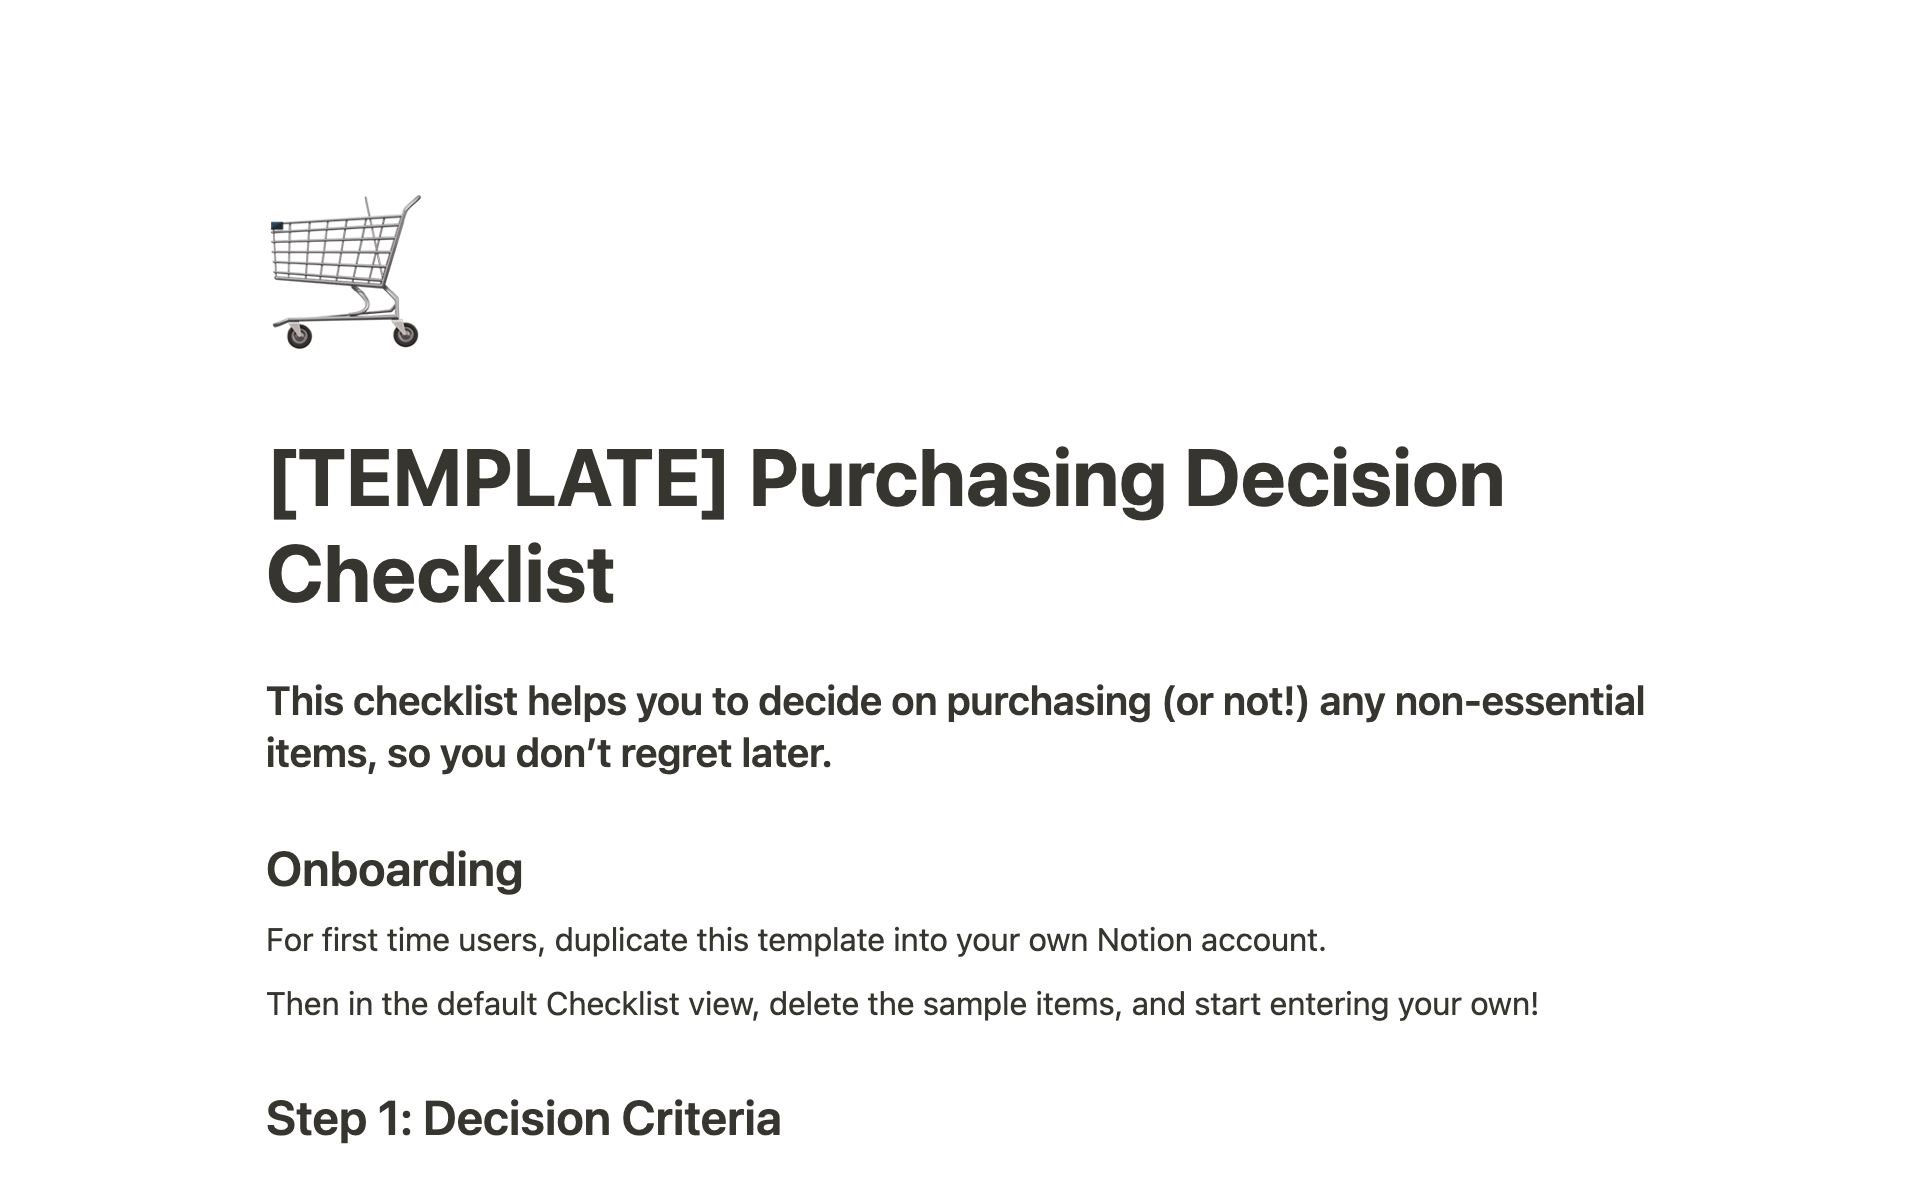 A simple checklist to make smarter purchasing decisions